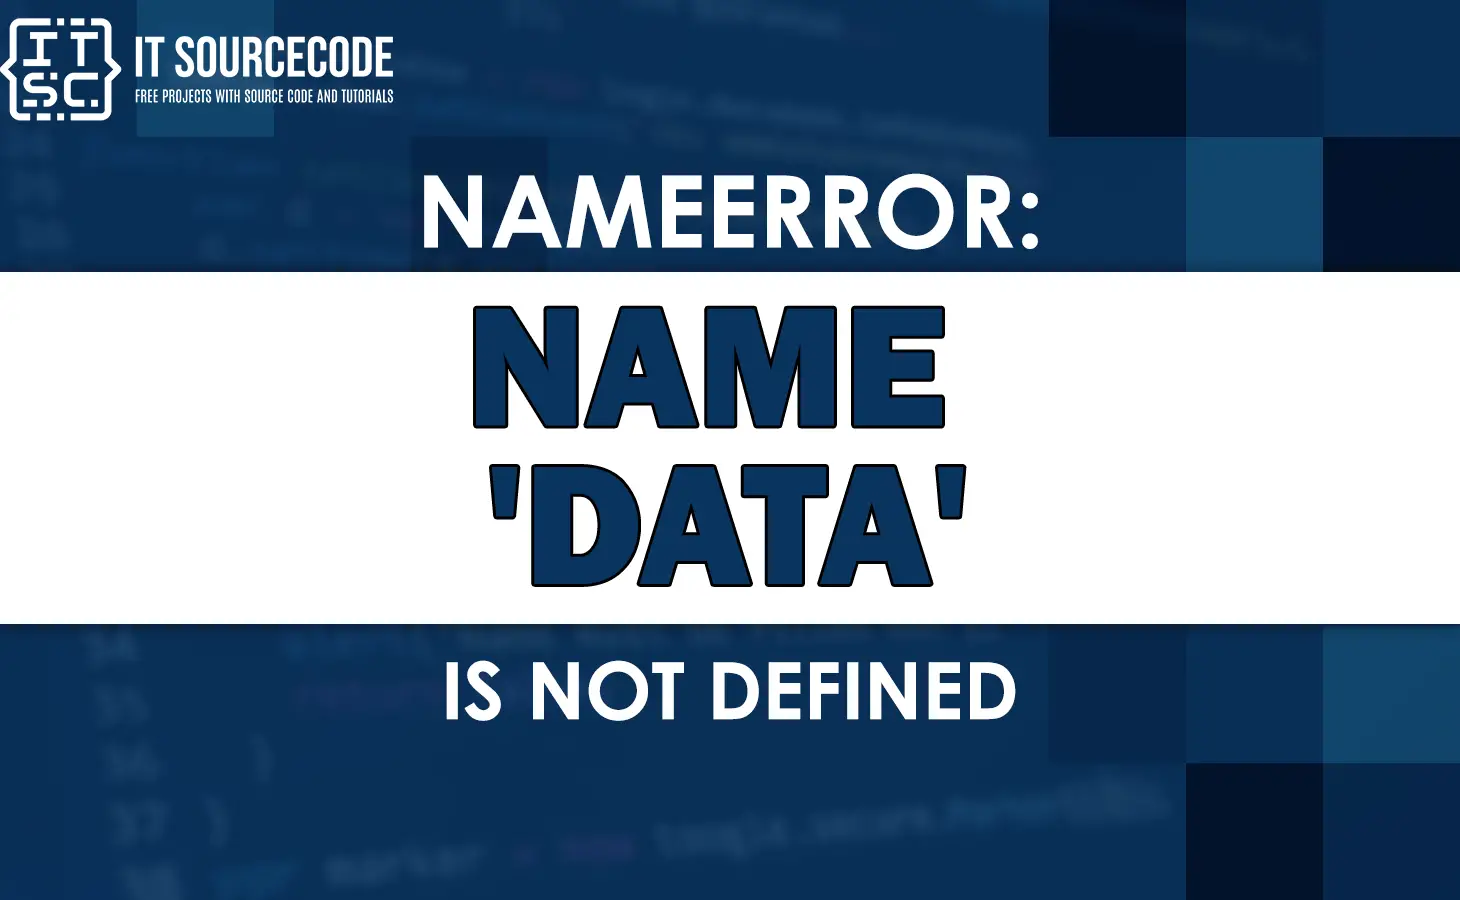 Nameerror name data is not defined